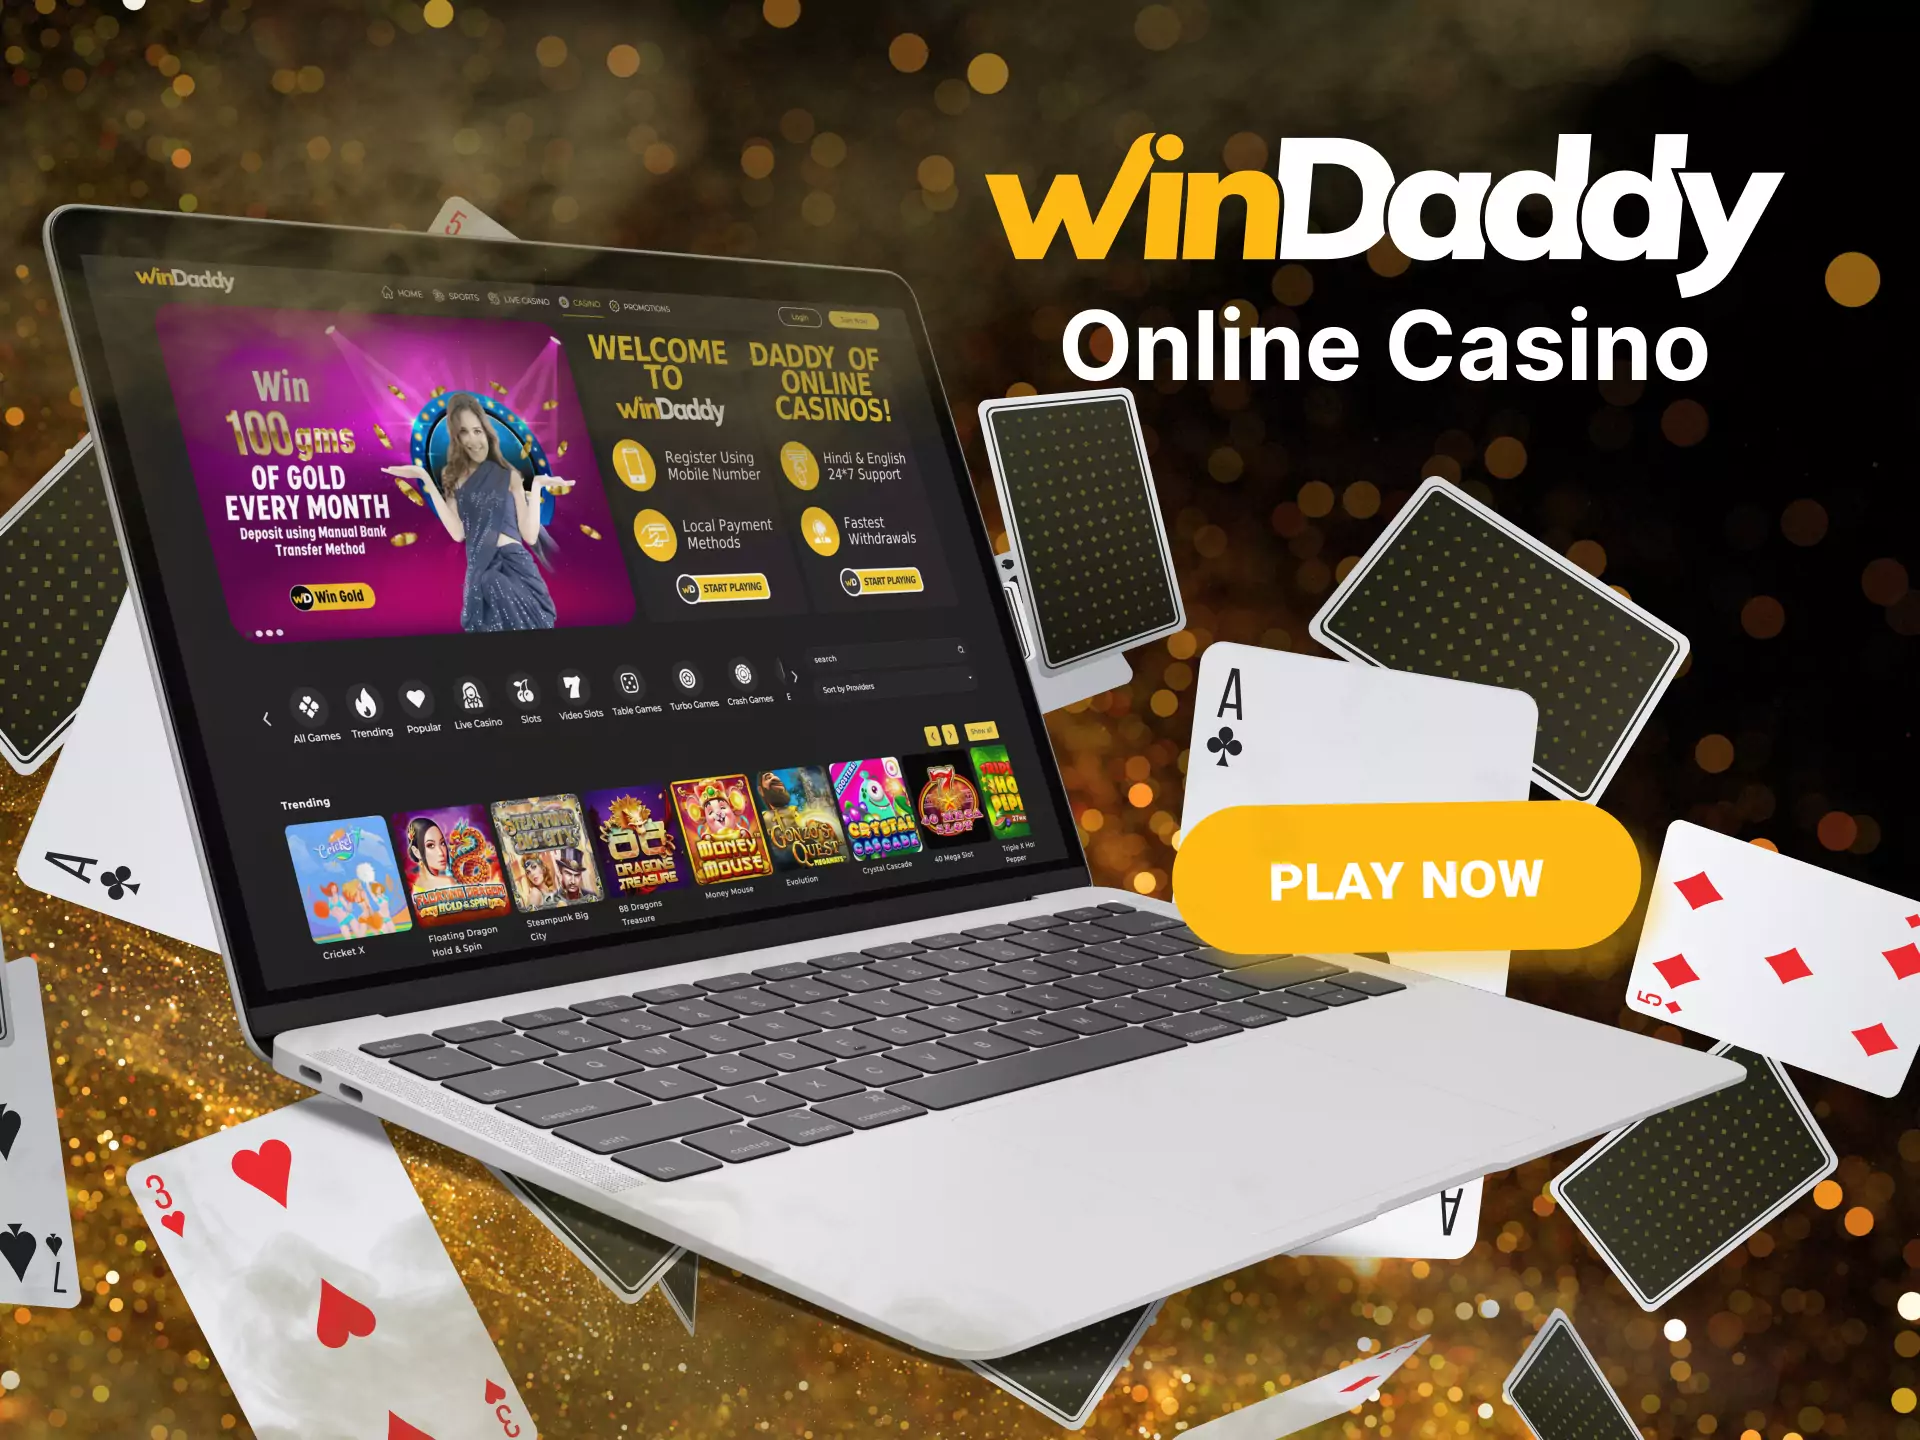 Windaddy offers many different online casino games.